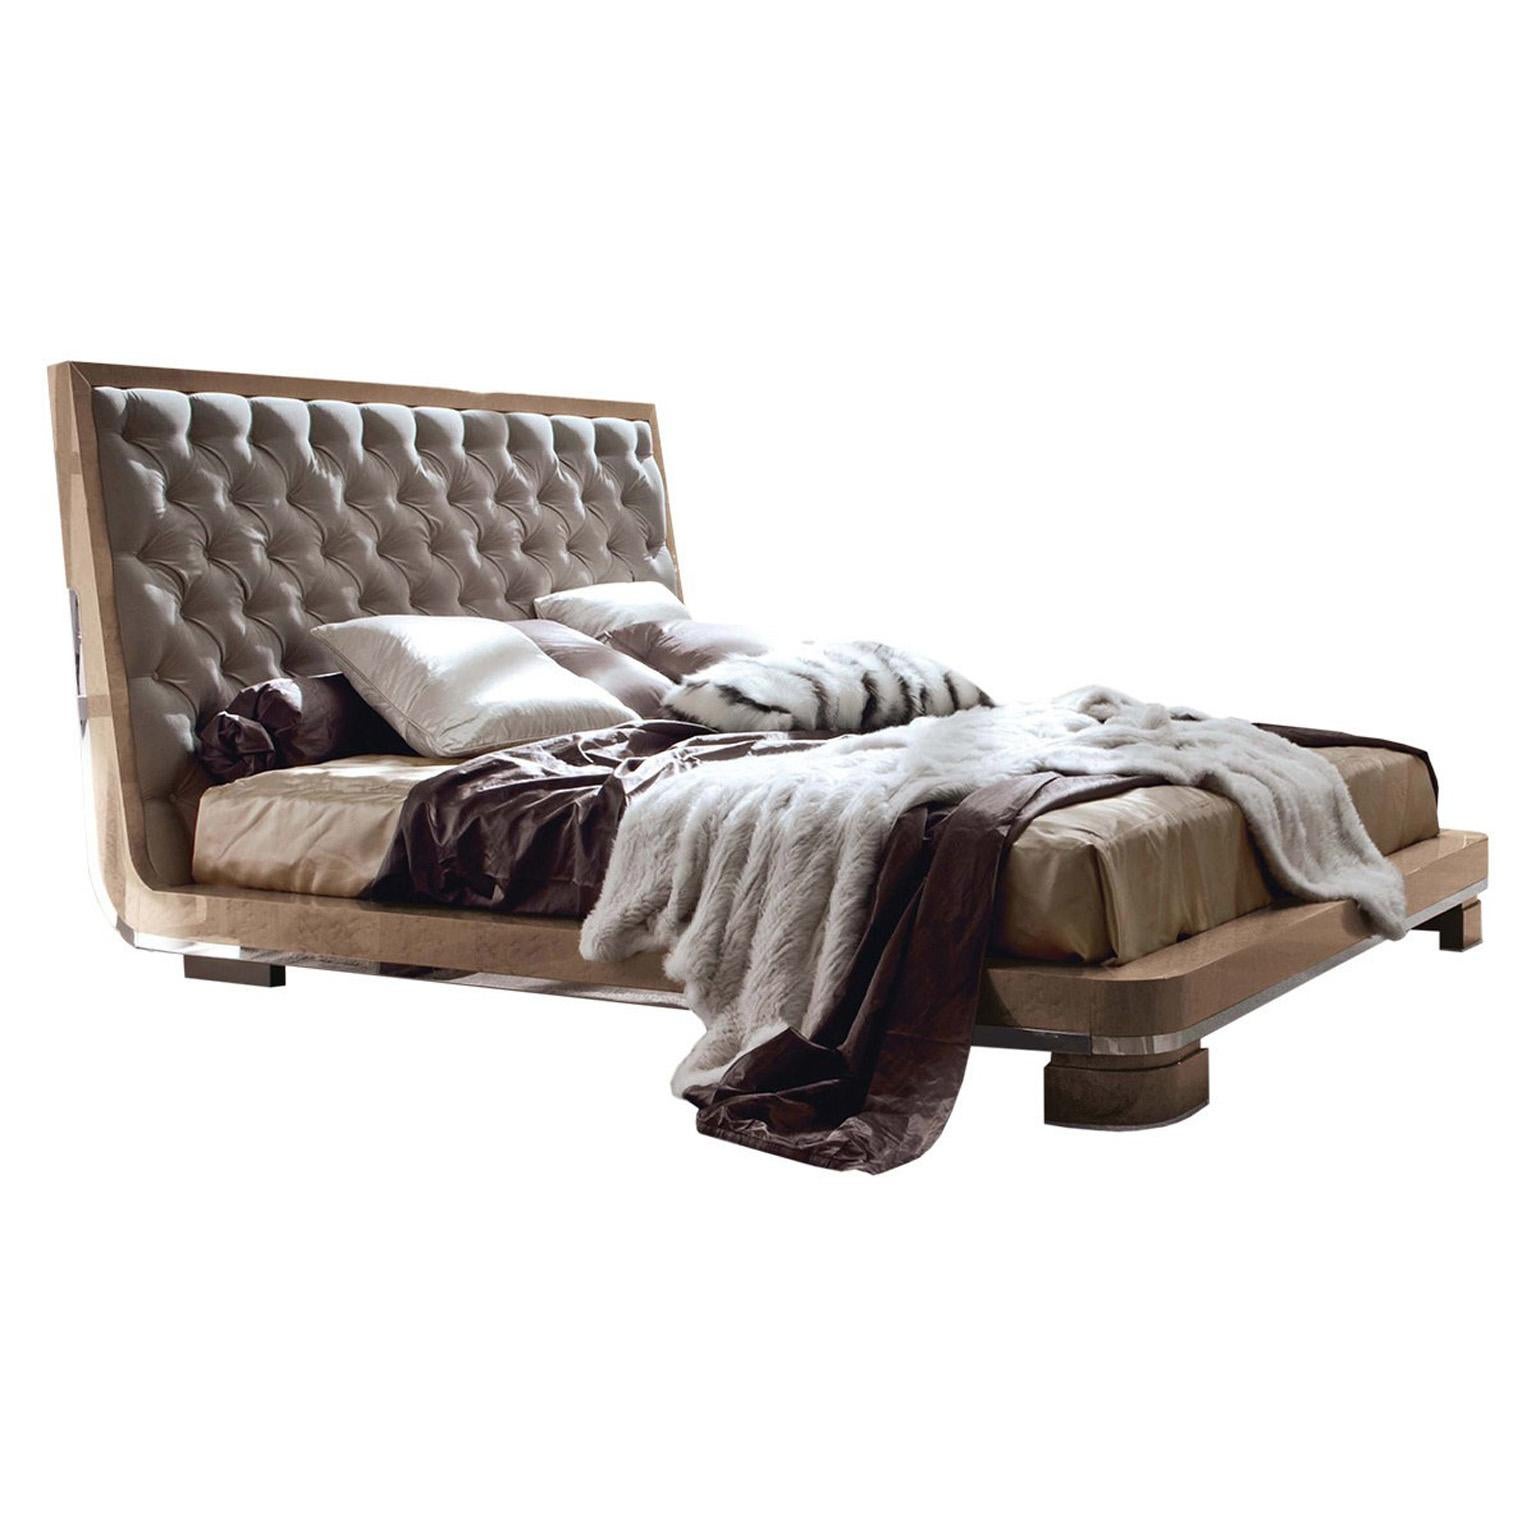 Fait main Giorgio Collection Tufted Upholstered Leather Headboard King Bed Sunrise en vente